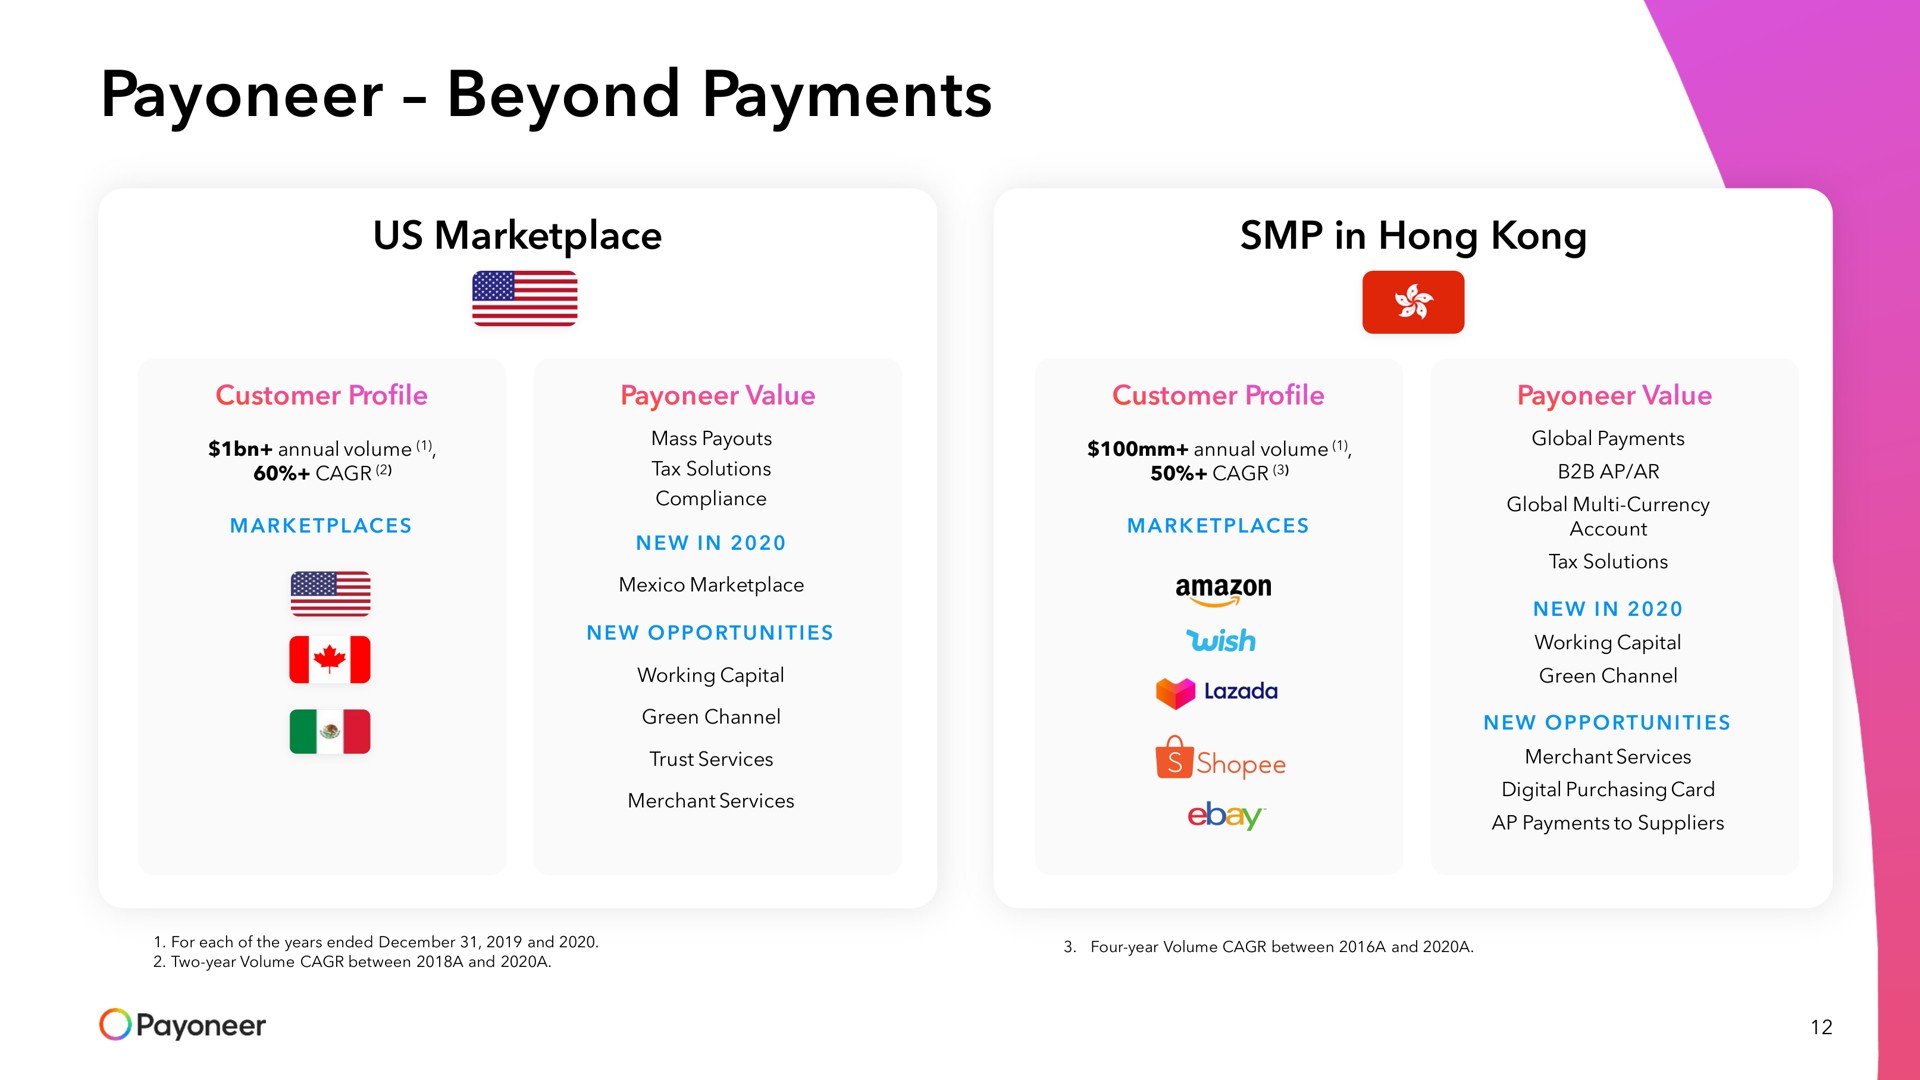 beyond payments | Payoneer